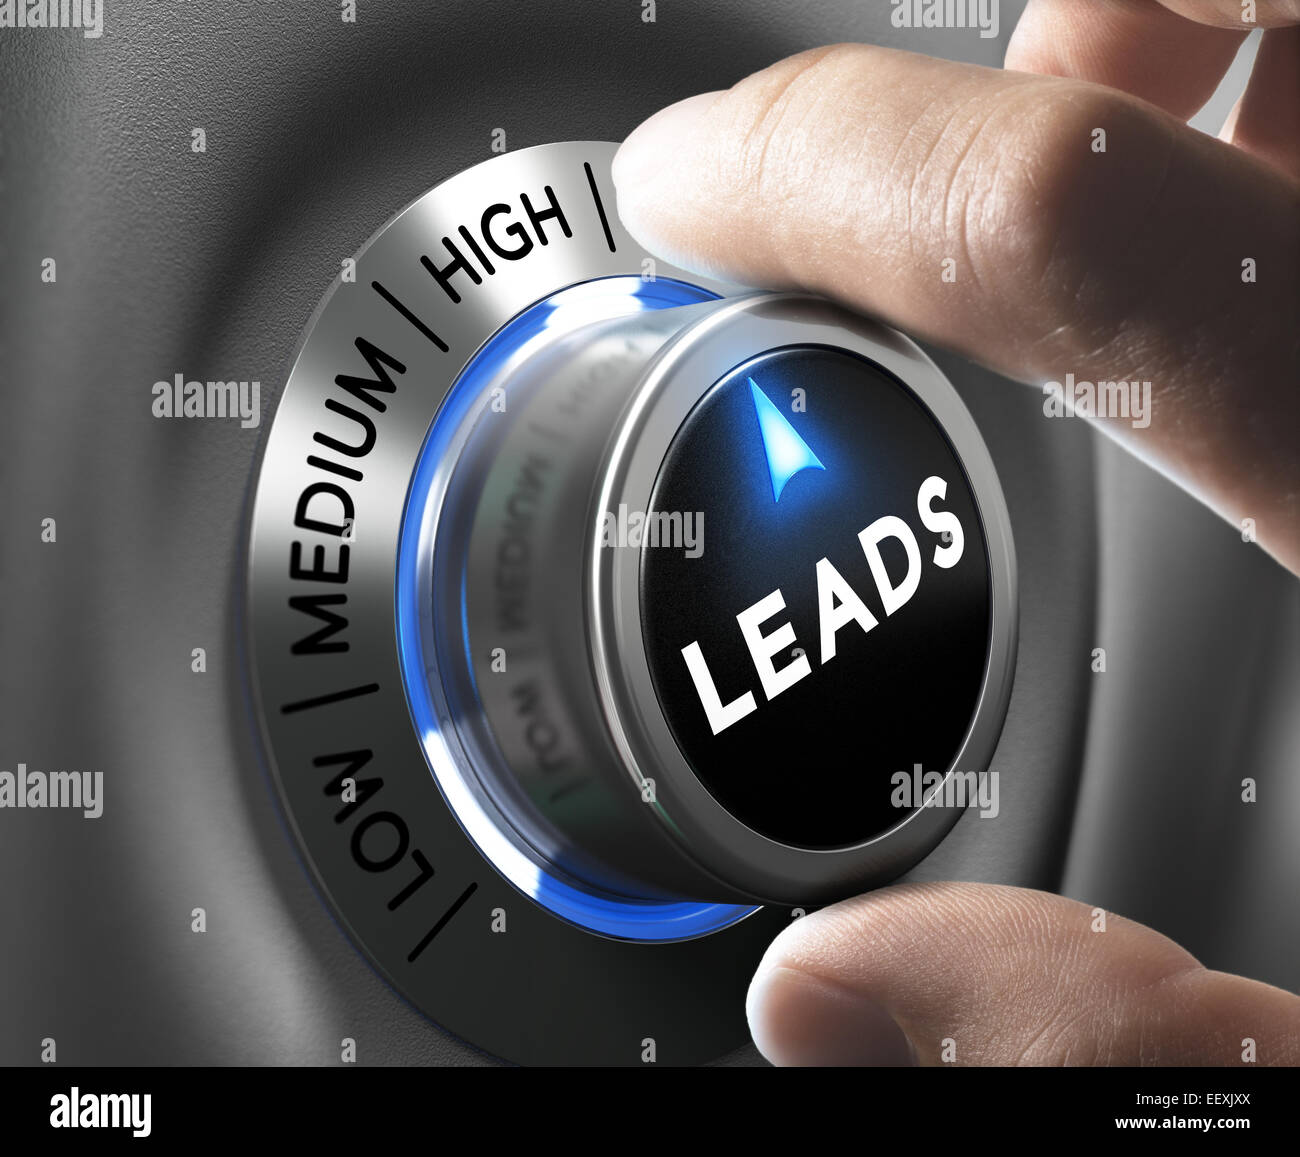 Leads button pointing  high position with two fingers, blue and grey tones, Conceptual image for increasing sales lead. Stock Photo